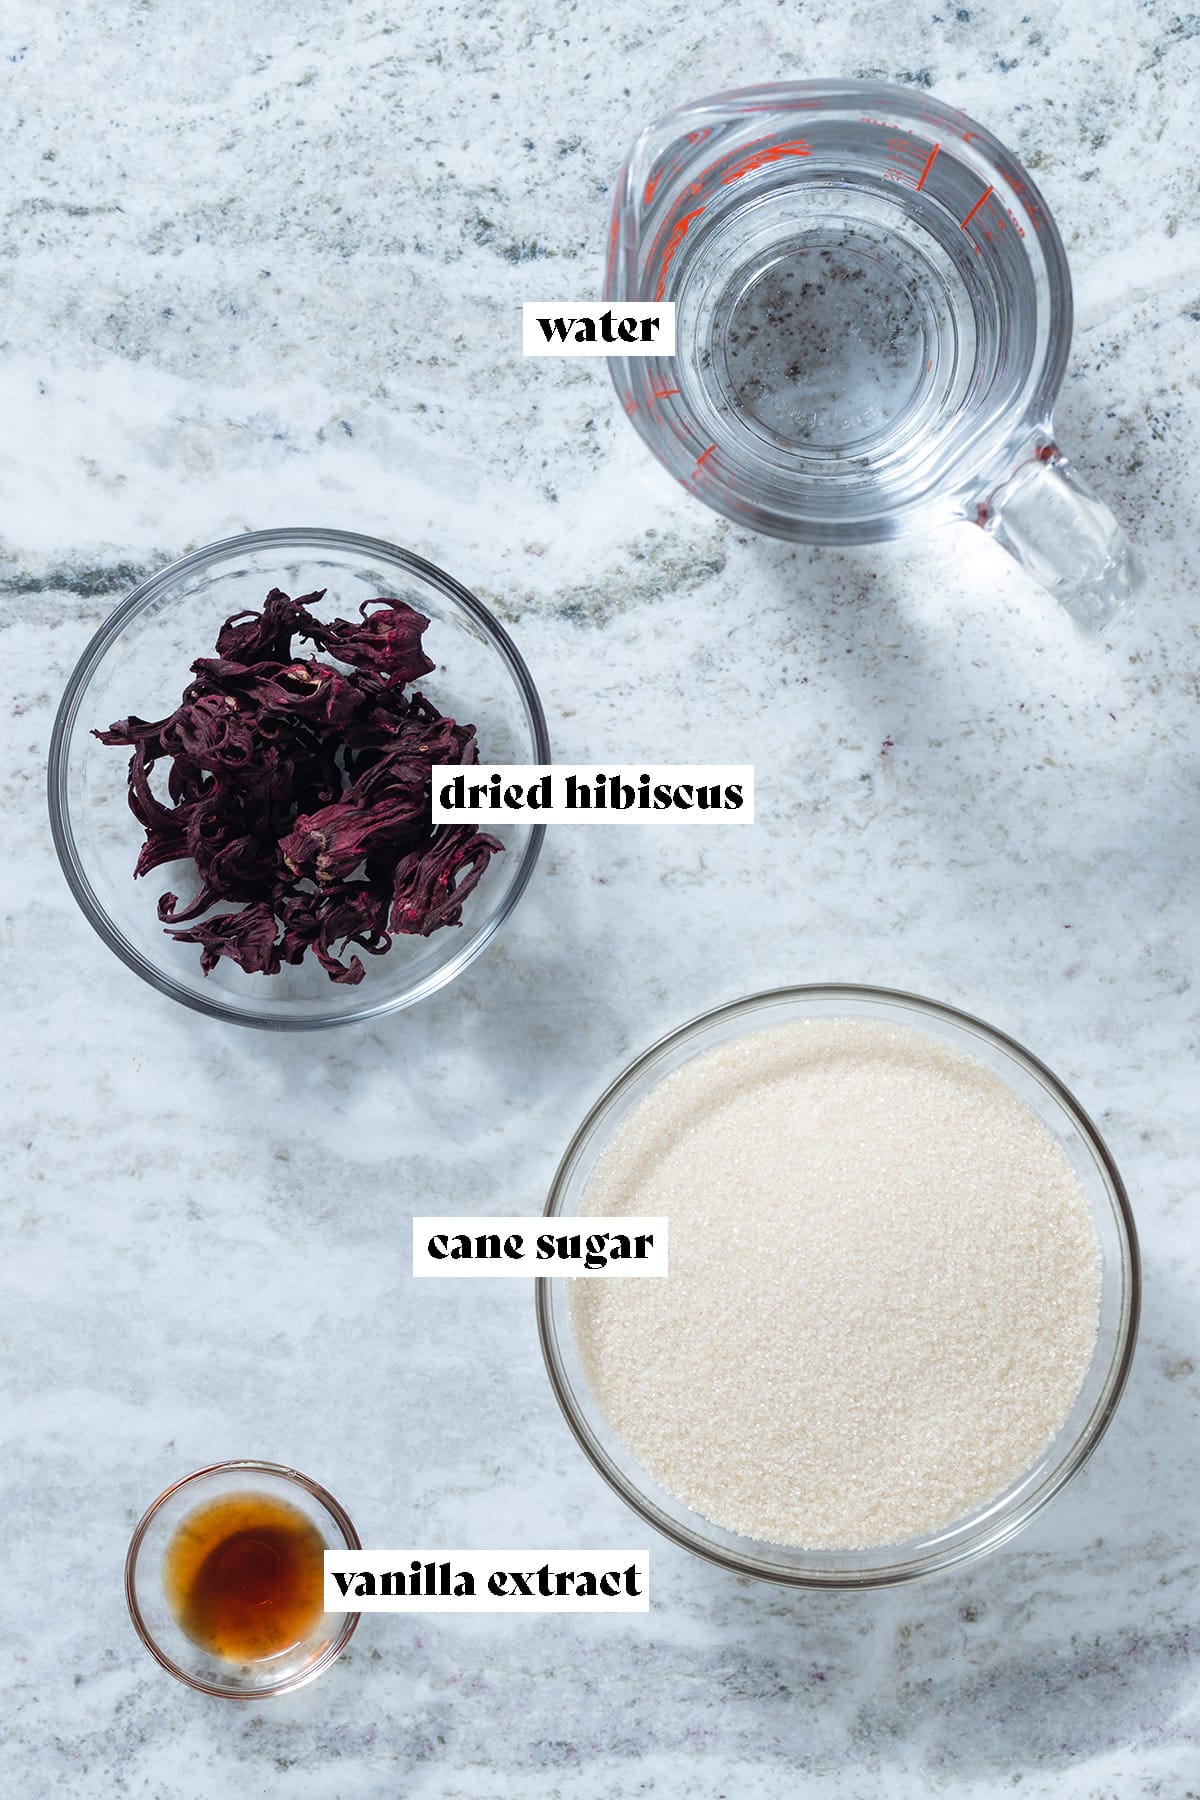 Dried hibiscus flowers, water, cane sugar, and vanilla extract laid out on a grey stone background.